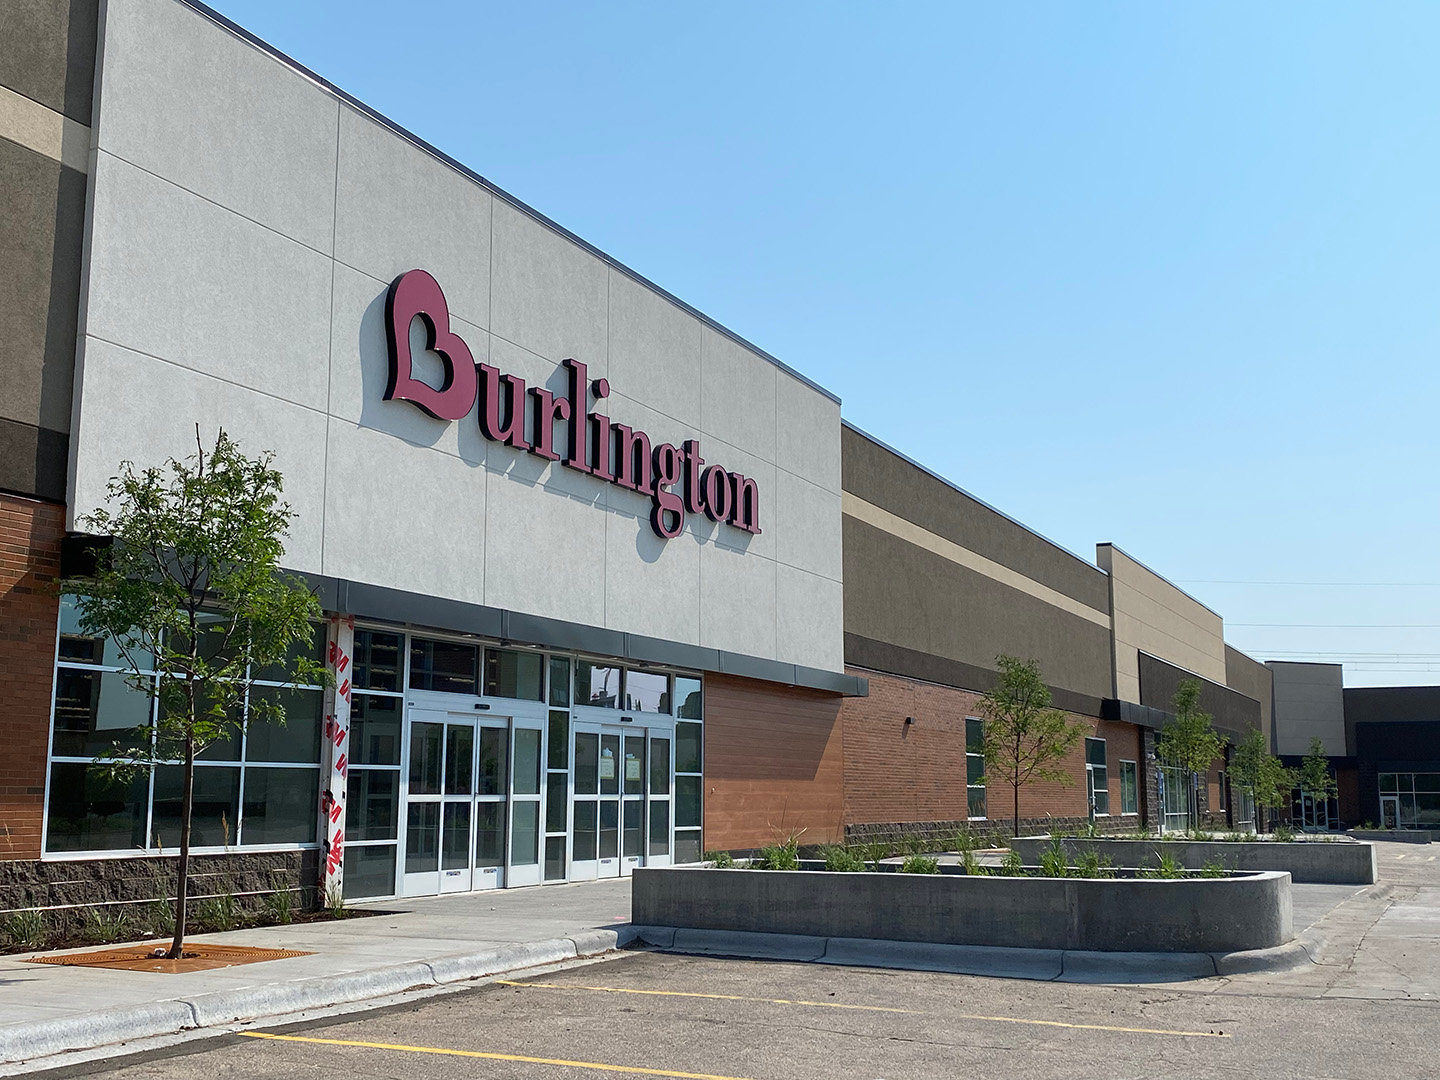 Burlington will open its 11th store in the state this fall at Hi-Lake Shopping Center. Prior to the fire that destroyed part of the shopping center, this central space had been home to Saver's. -(Photo by Tesha M. Christensen)